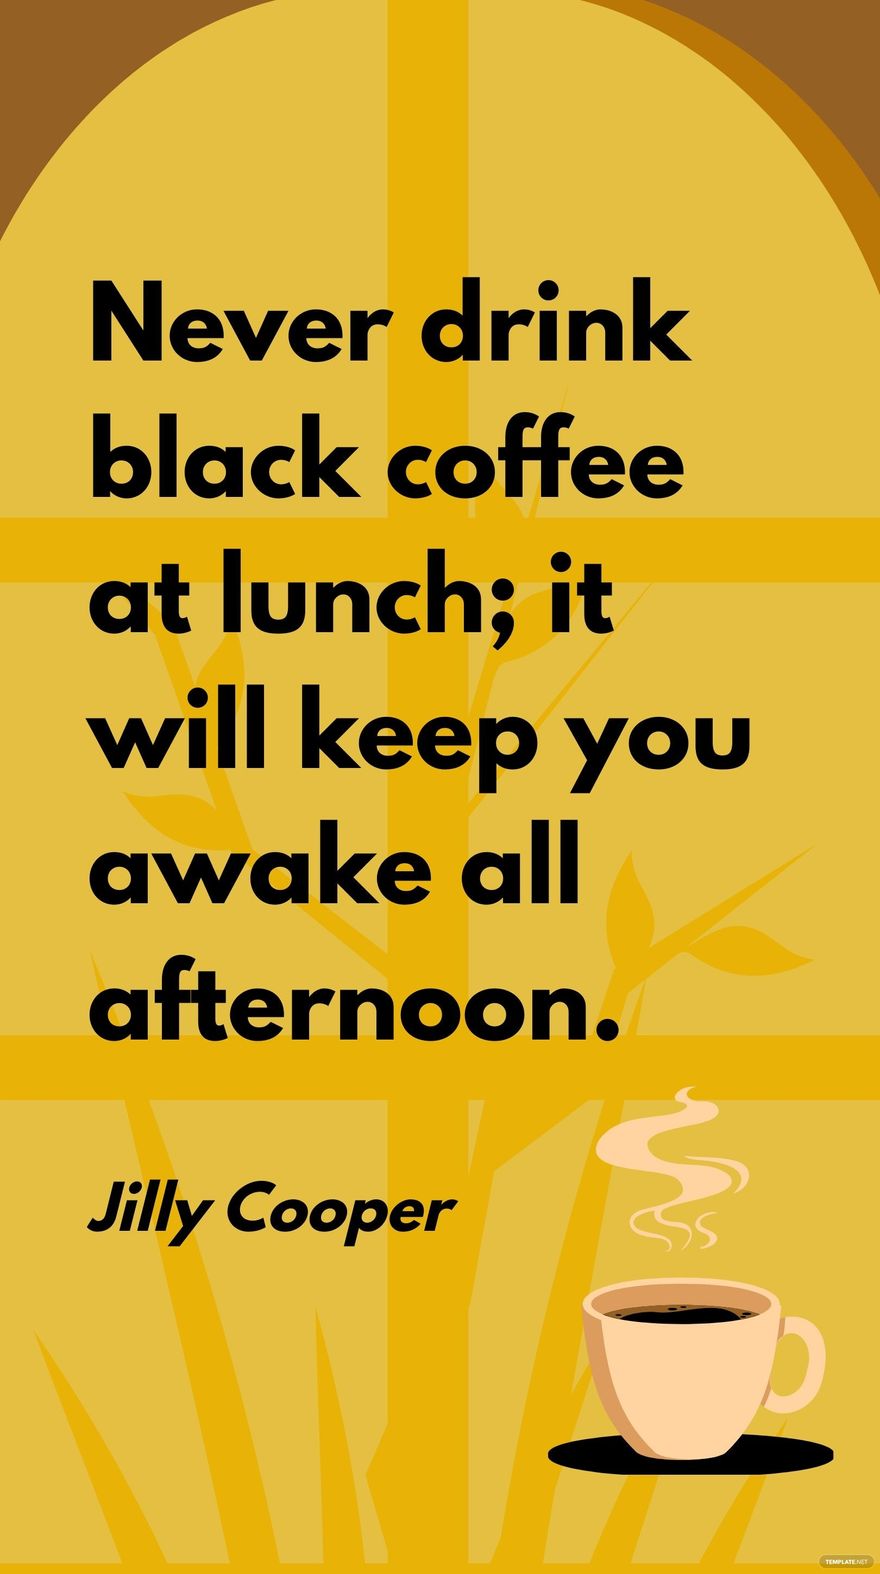 Jilly Cooper - Never drink black coffee at lunch; it will keep you awake all afternoon.